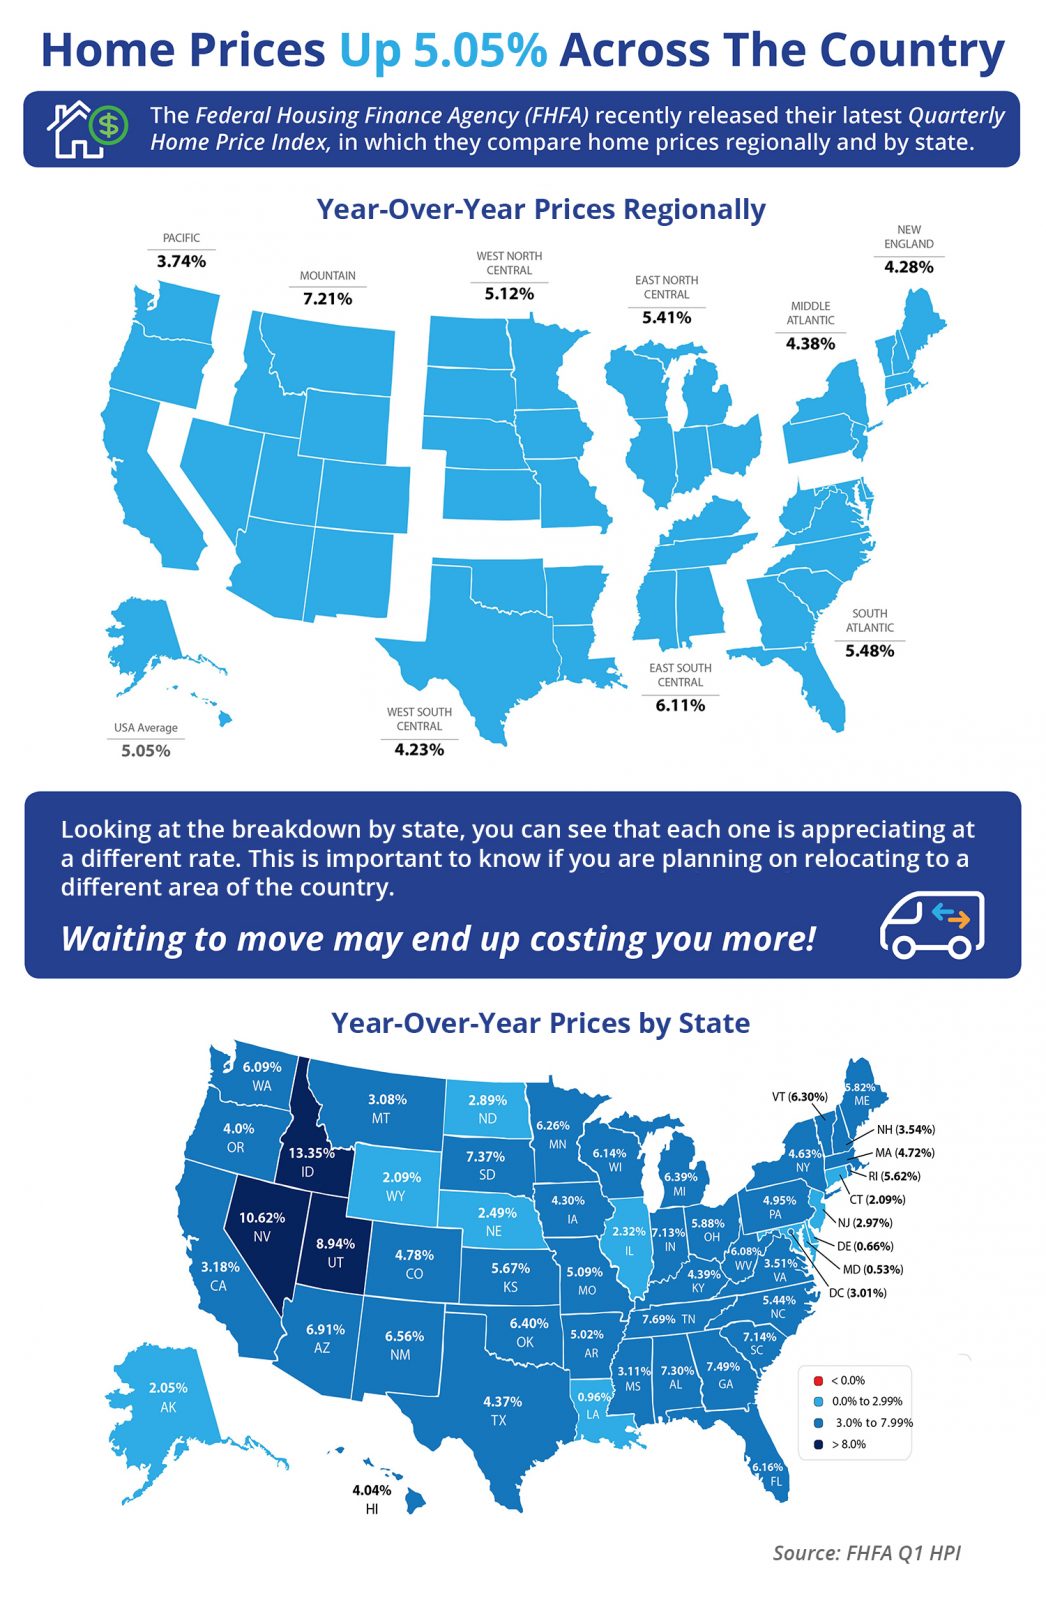 Home Prices Up 5.05% Across the Country [INFOGRAPHIC] | MyKCM